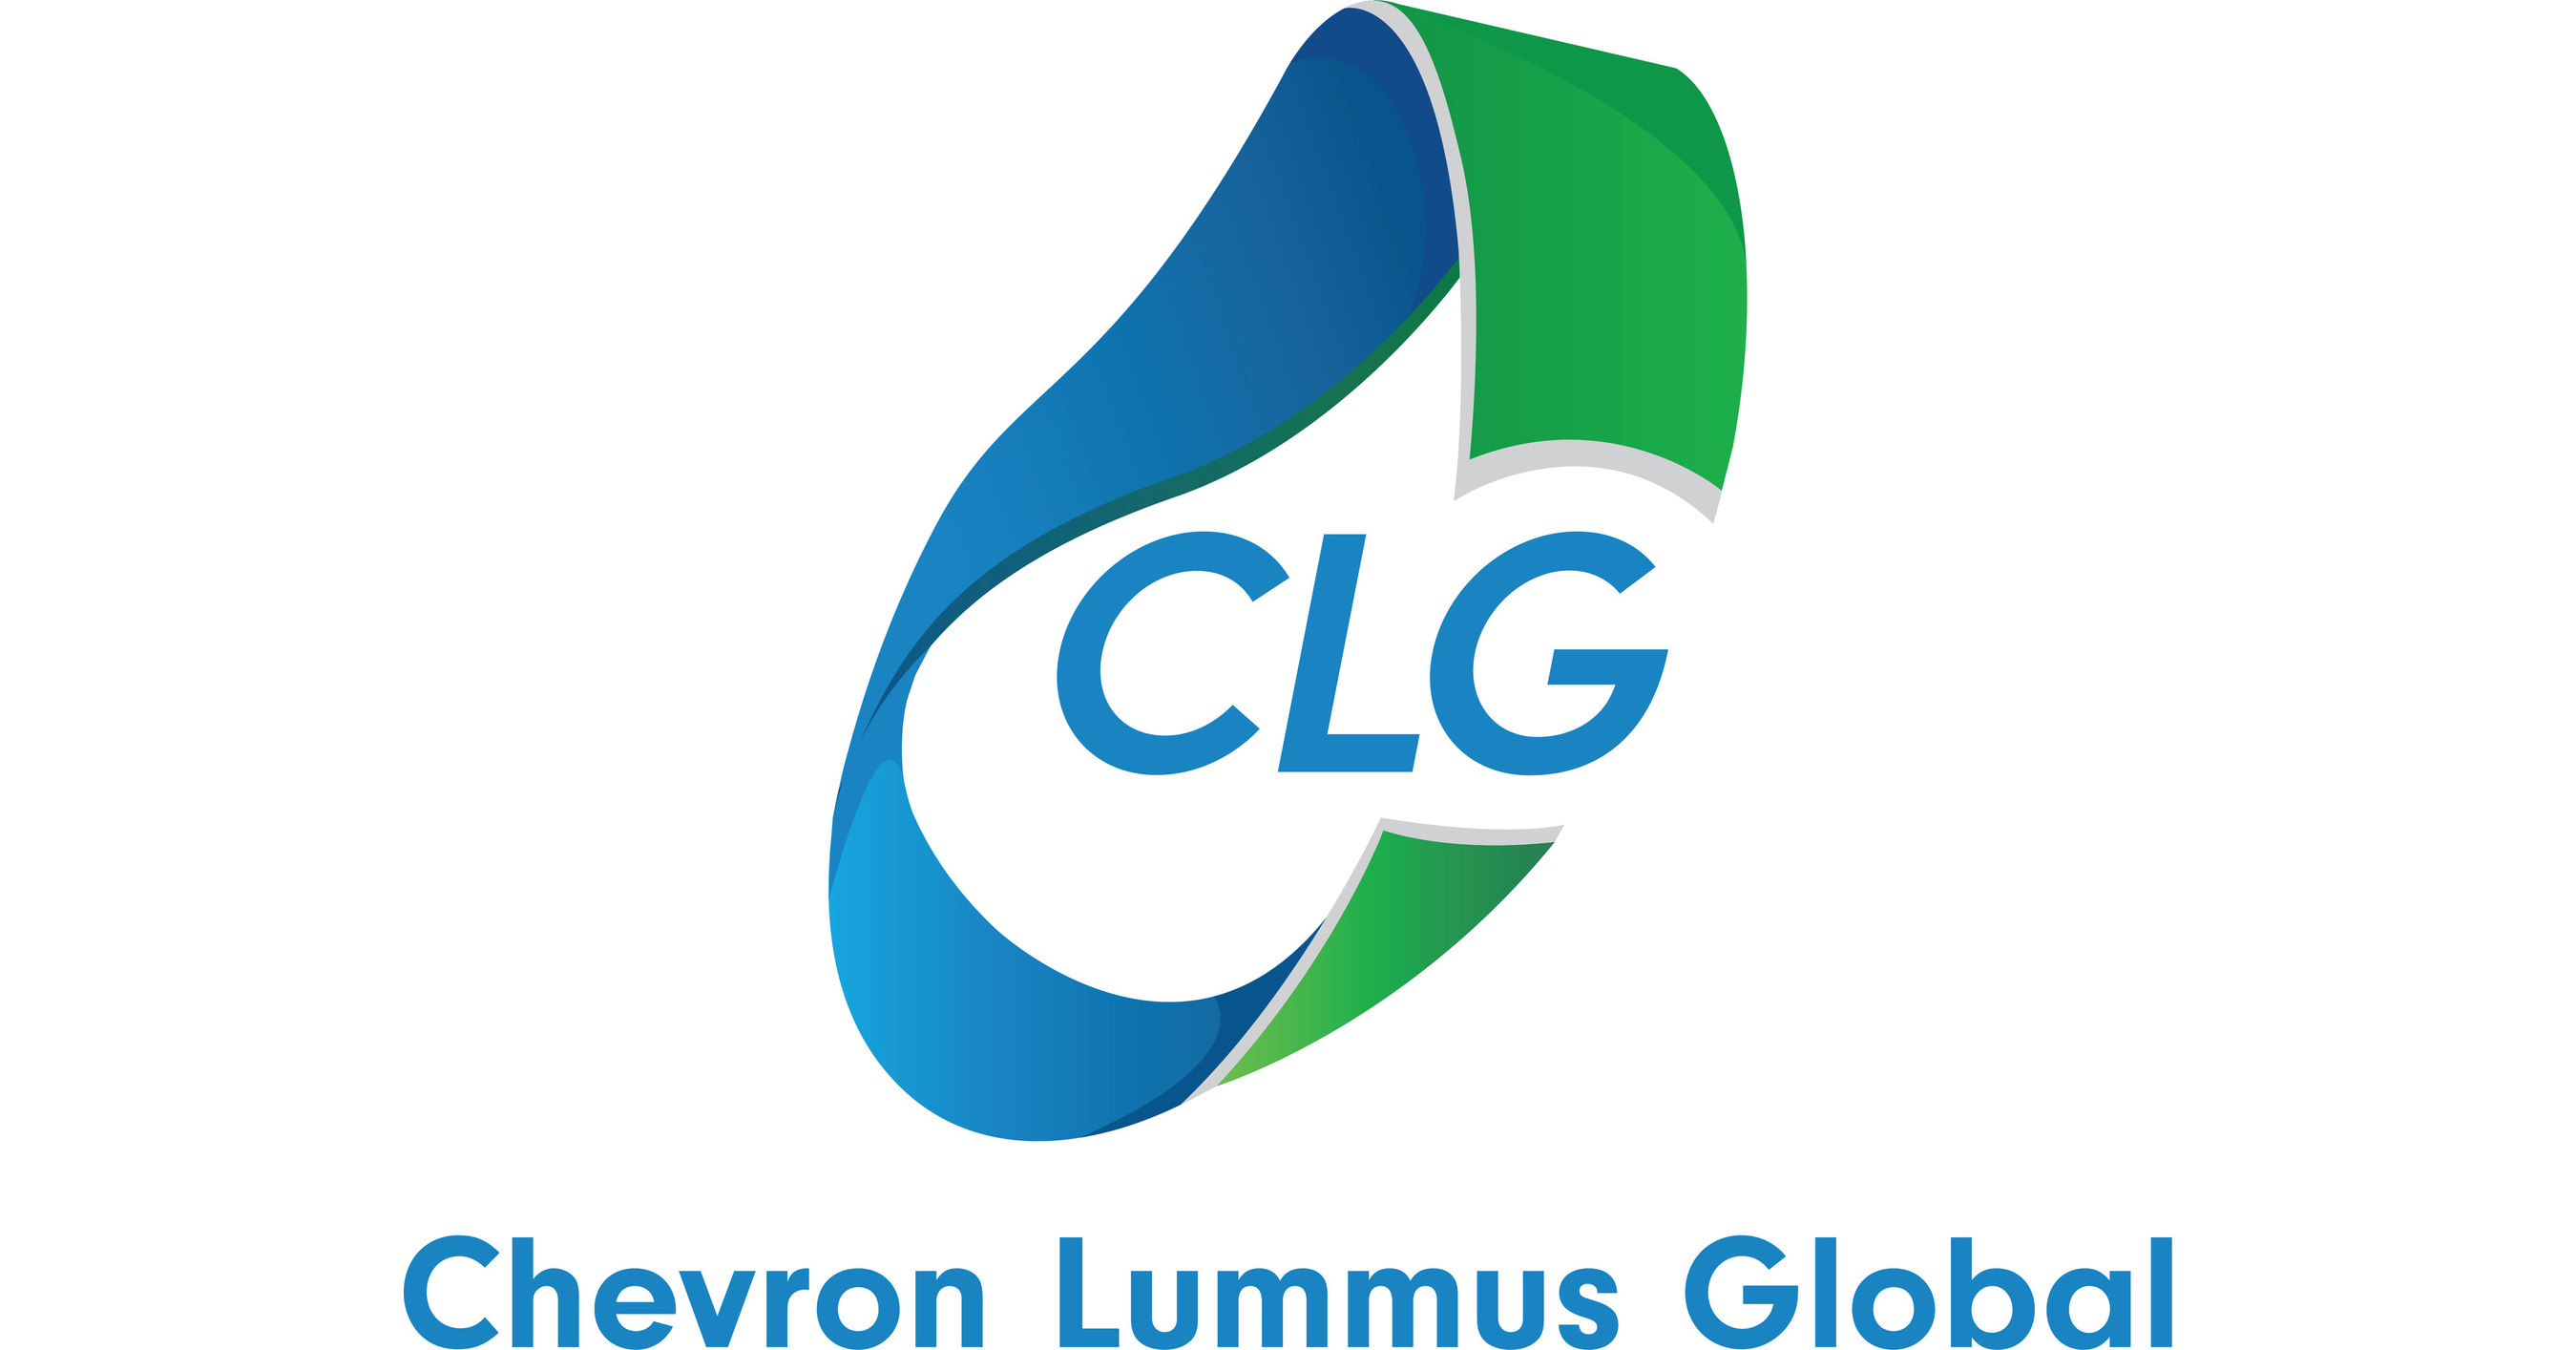 Chevron Lummus Global’s ISOTERRA Technology Chosen for Sustainable Aviation Fuel Initiative in China